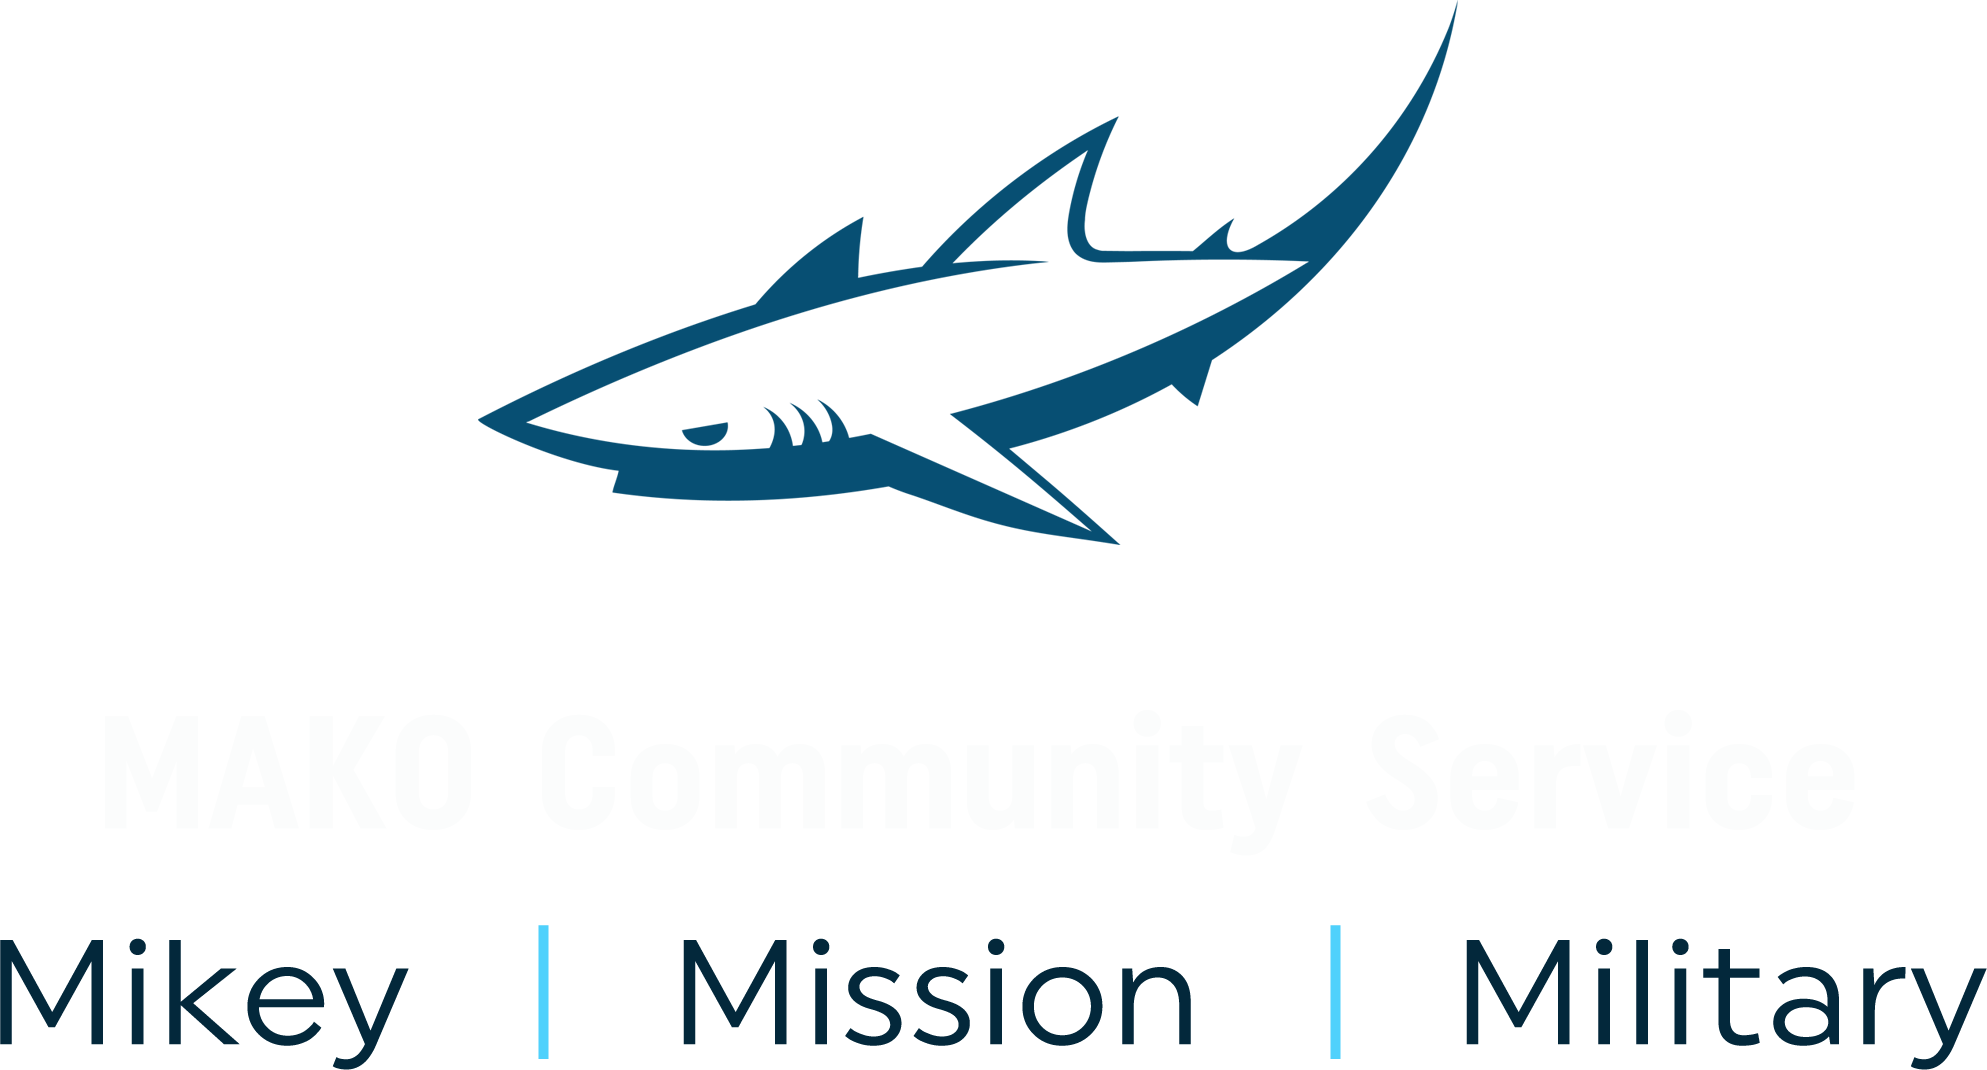 Mako Community Service- Mikey, Mission, Military